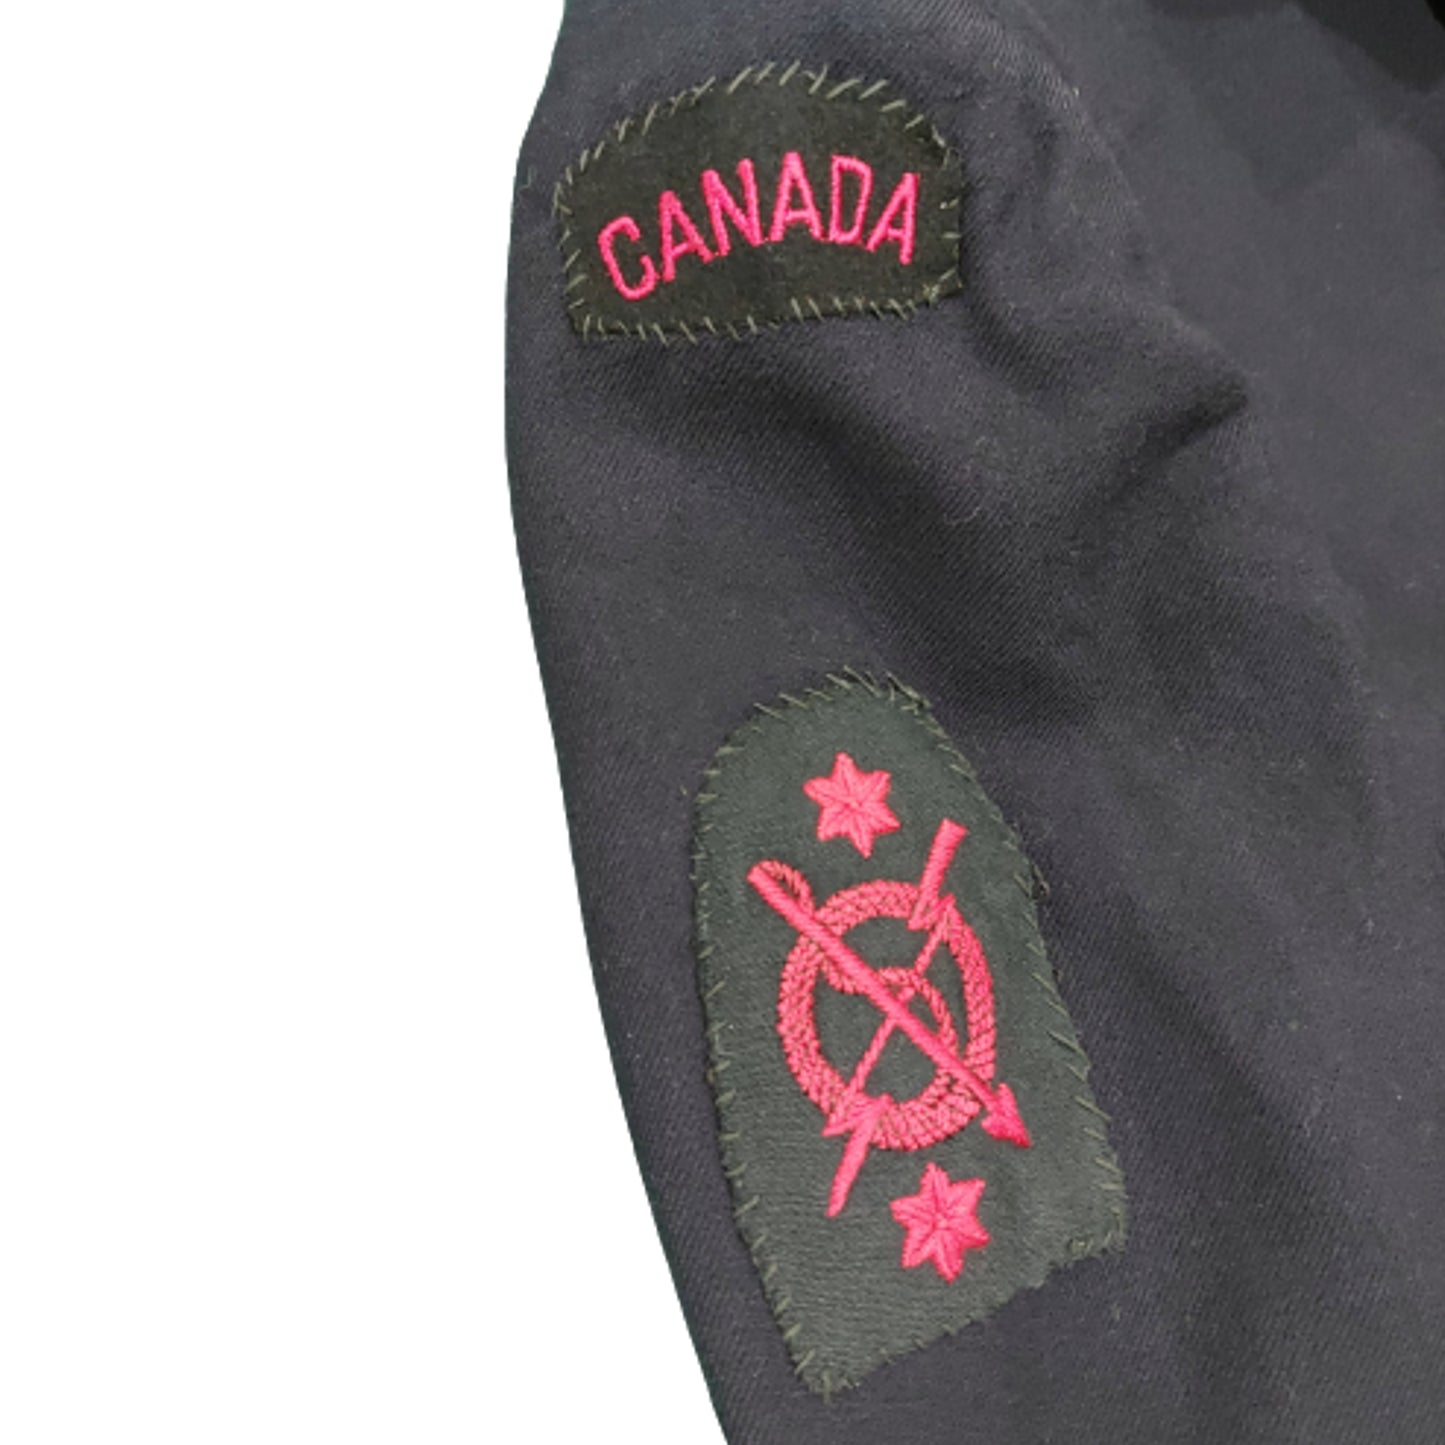 Named WW2 RCN Royal Canadian Navy Higher Submarine Detector Petty Officer's Reefer Jacket Uniform